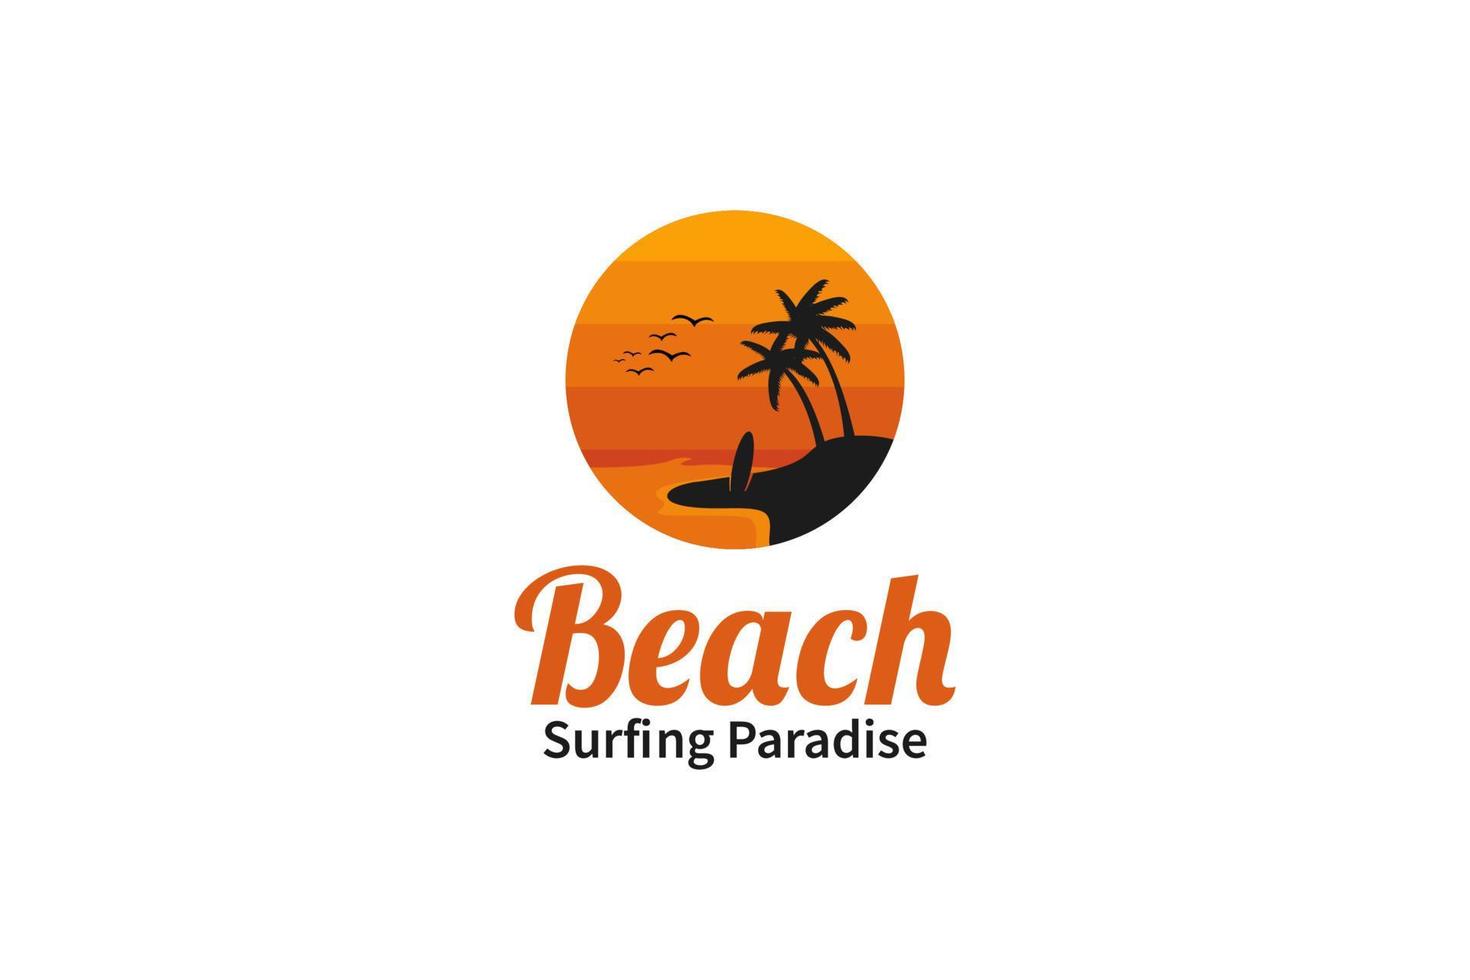 Beach sunset logo with palm trees vector